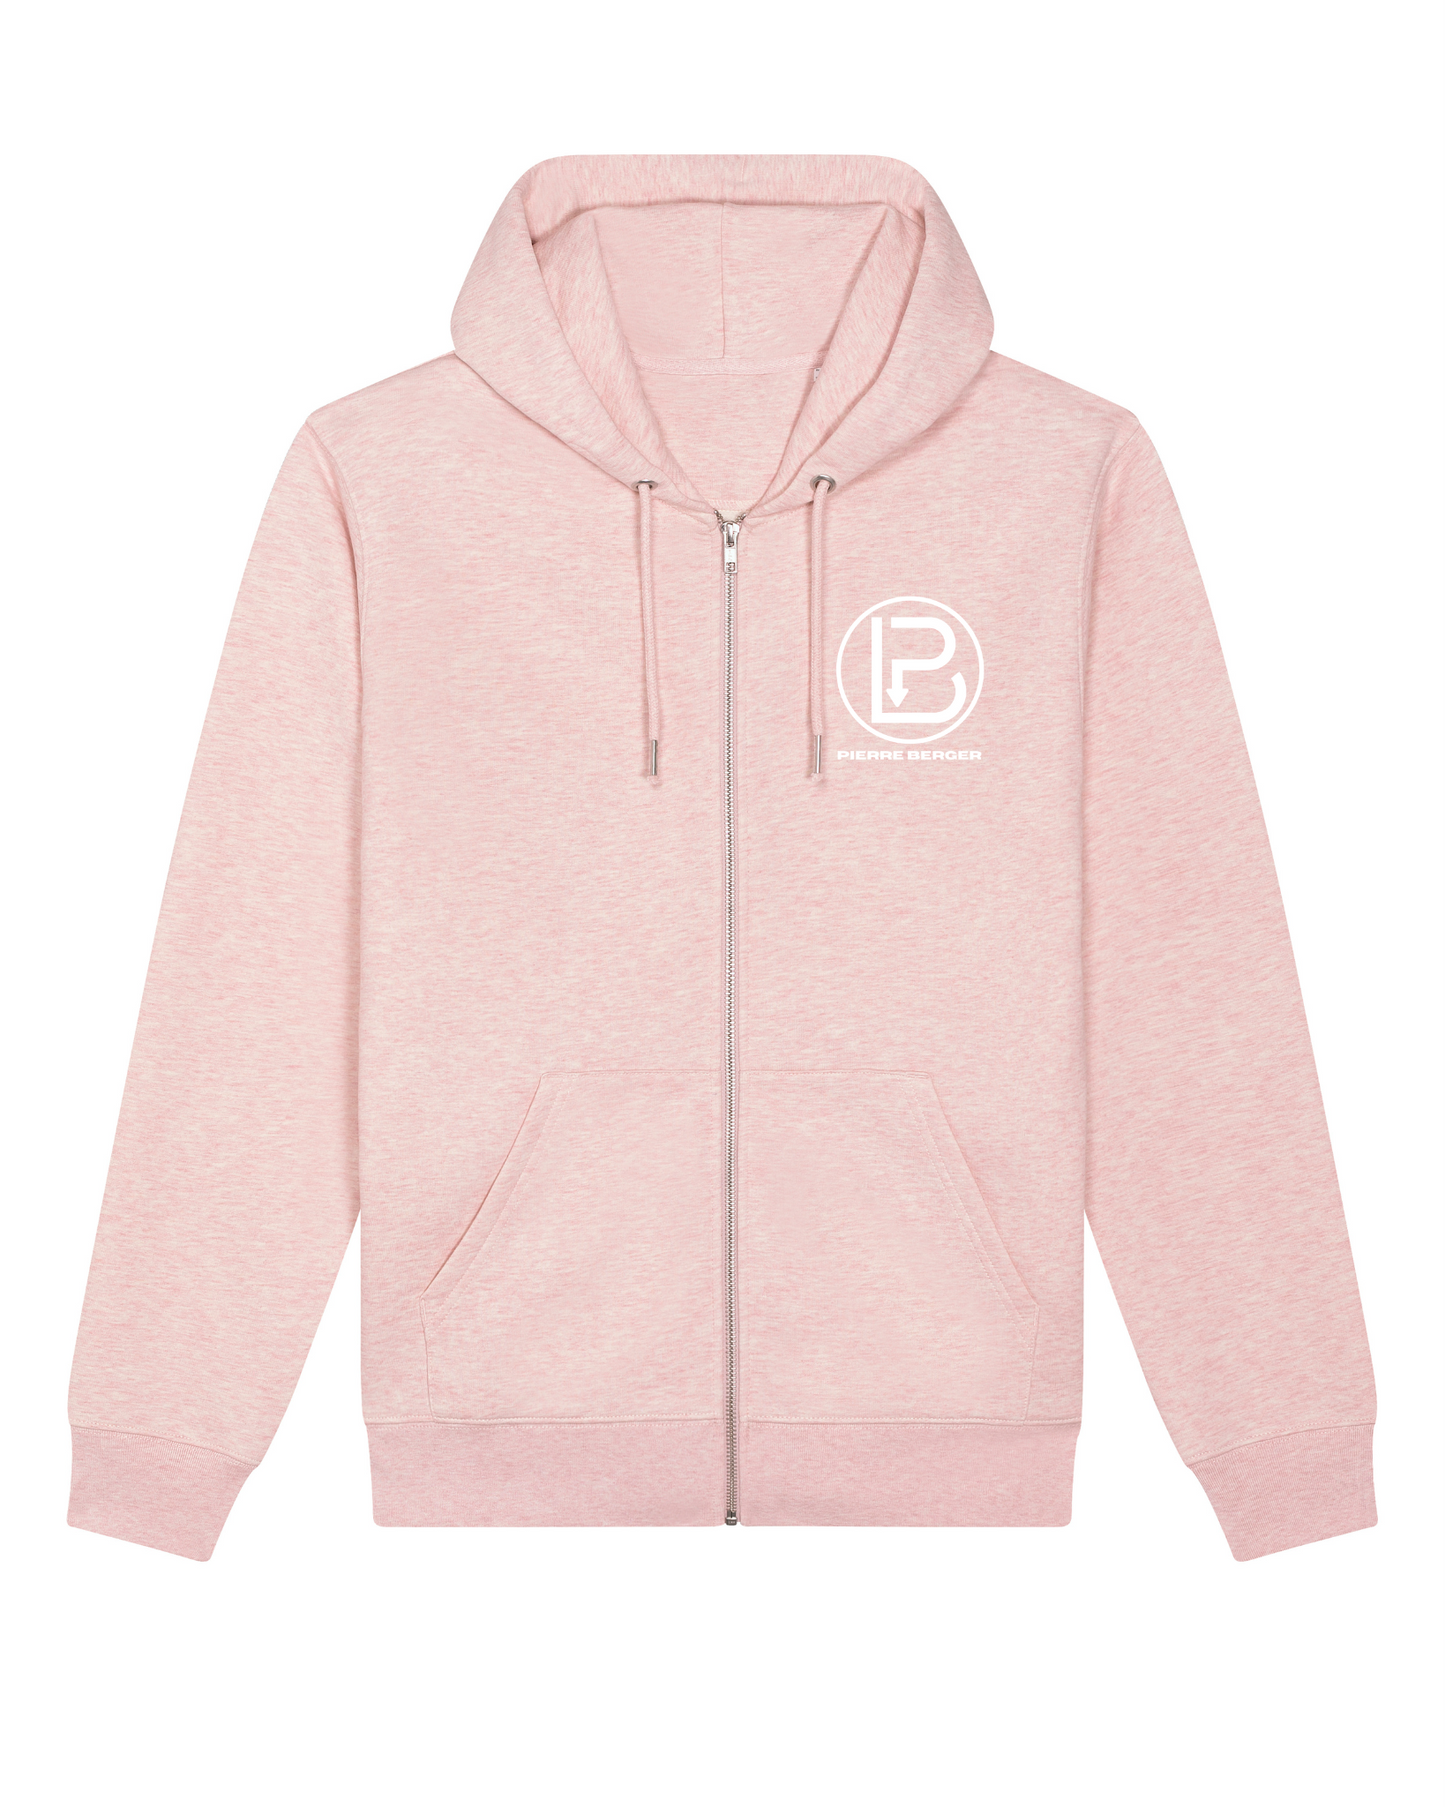 PIERRE BERGER - Unisex zip-up hoodie 100% recycled embroidery